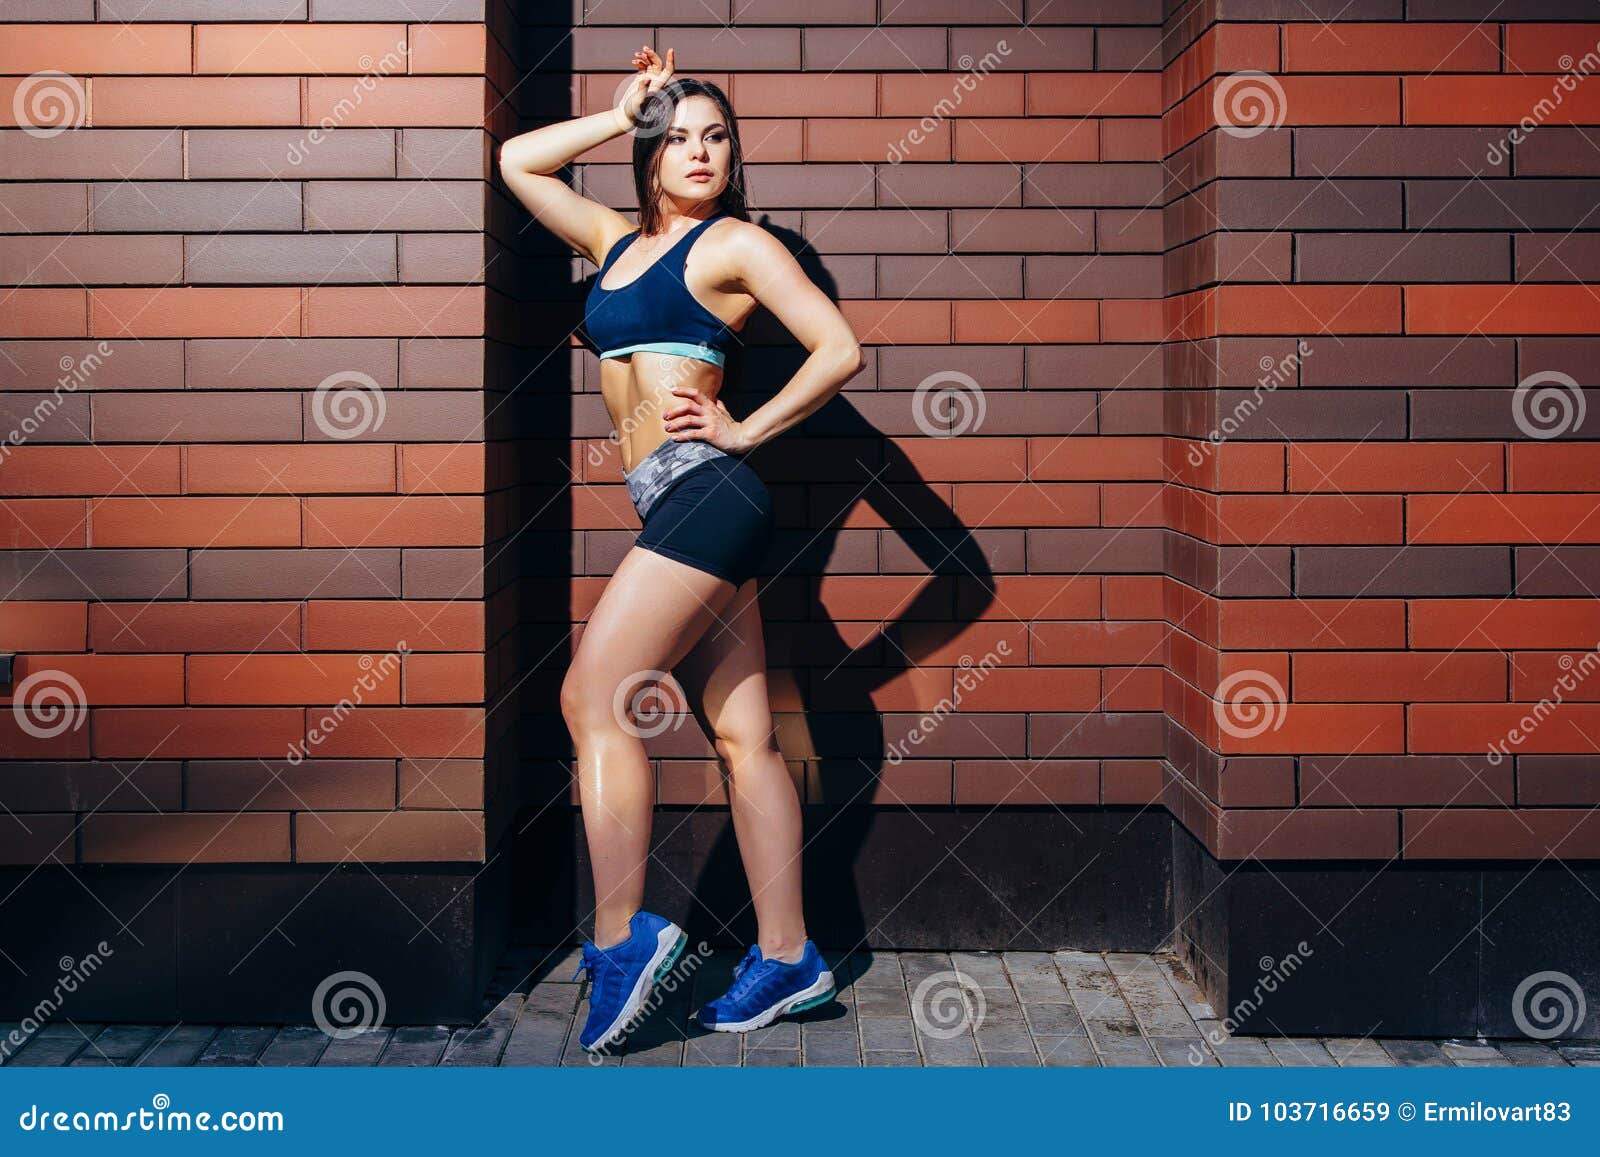 Beautiful Fitness Model Posing Against a Brick Wall Background. Stock ...